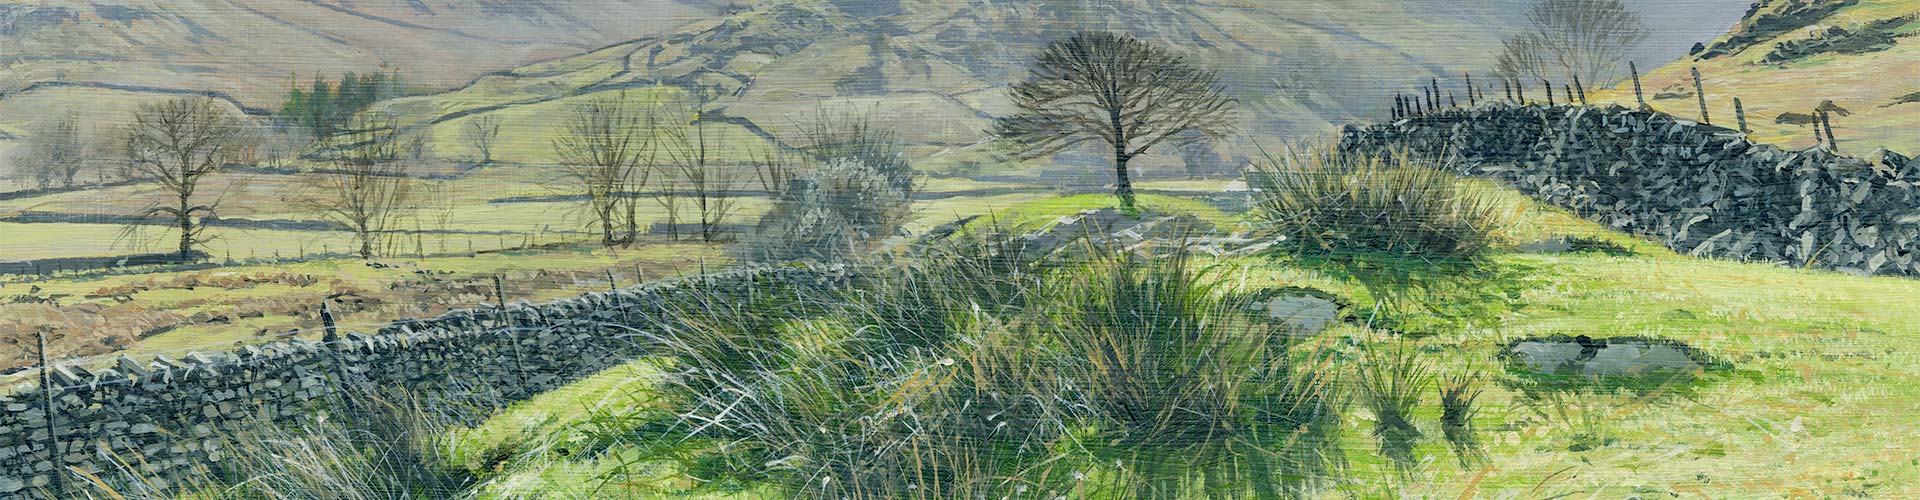 Alistair Butt oil painting of Little Langdale in Cumbria